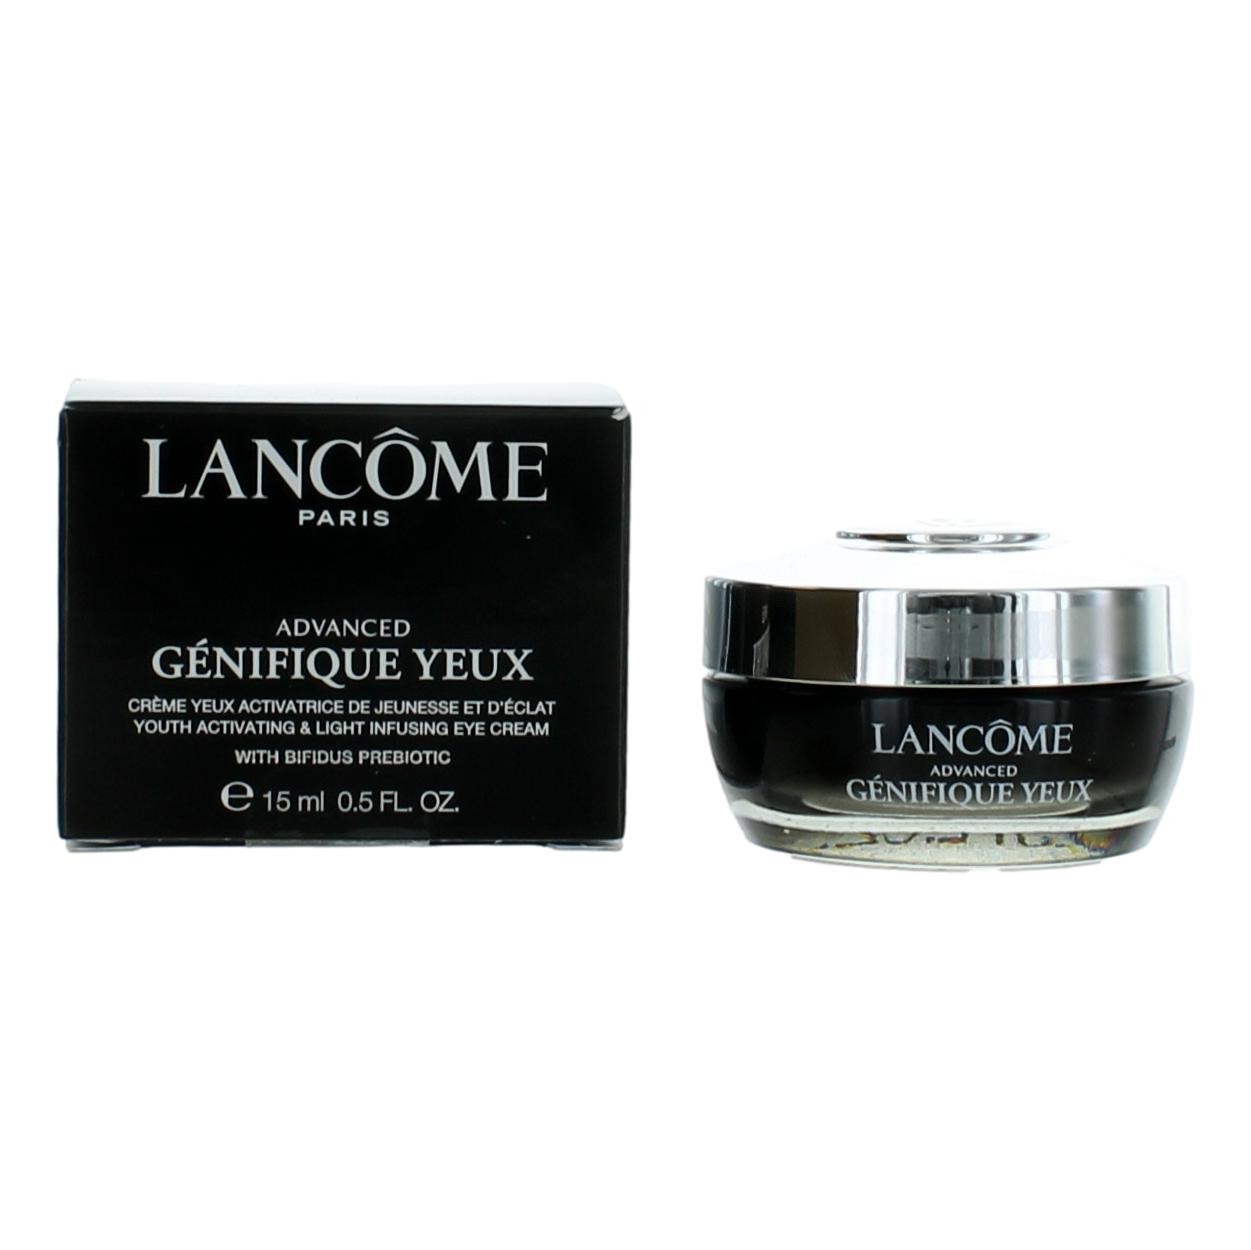 Lancome by Lancome .5 oz Advanced Genifique Yeux Youth Activating & Light Infusing Eye Cream